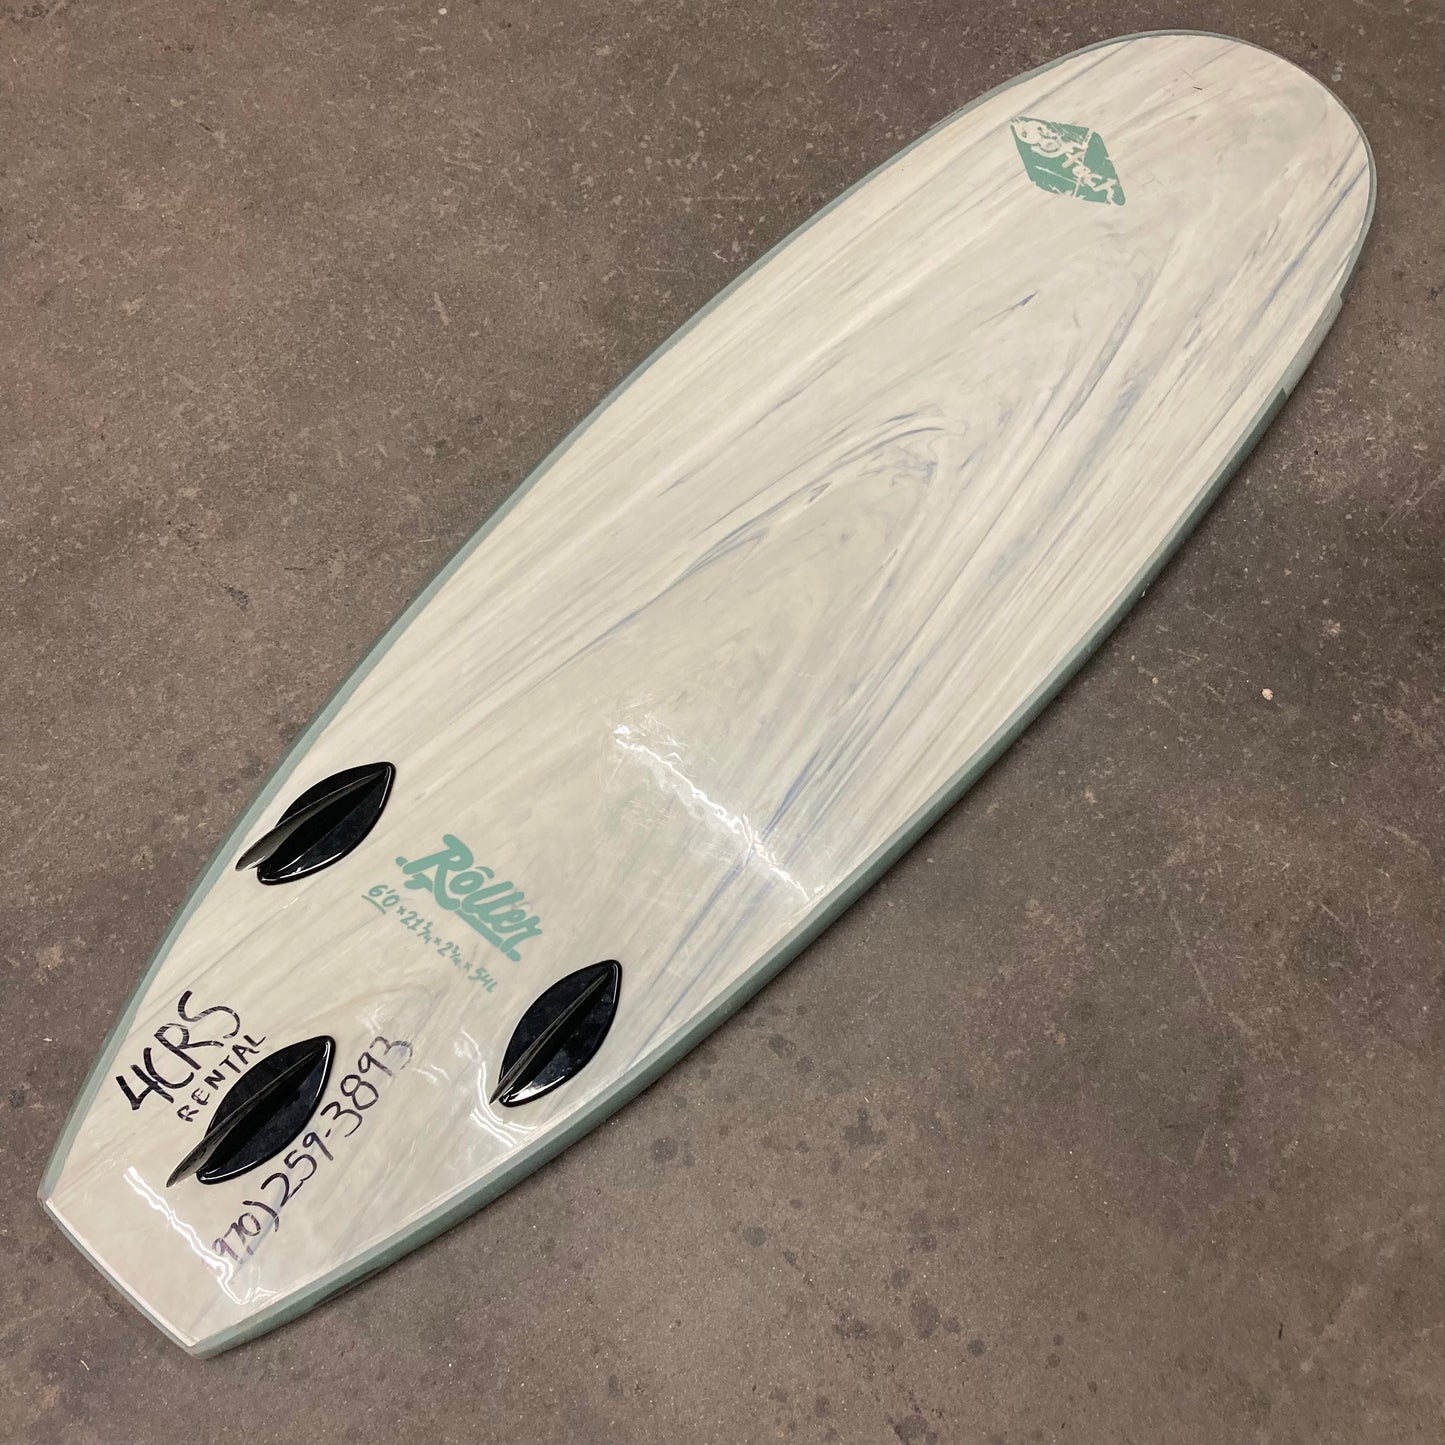 A white Demo Roller surfboard sitting on a concrete floor.